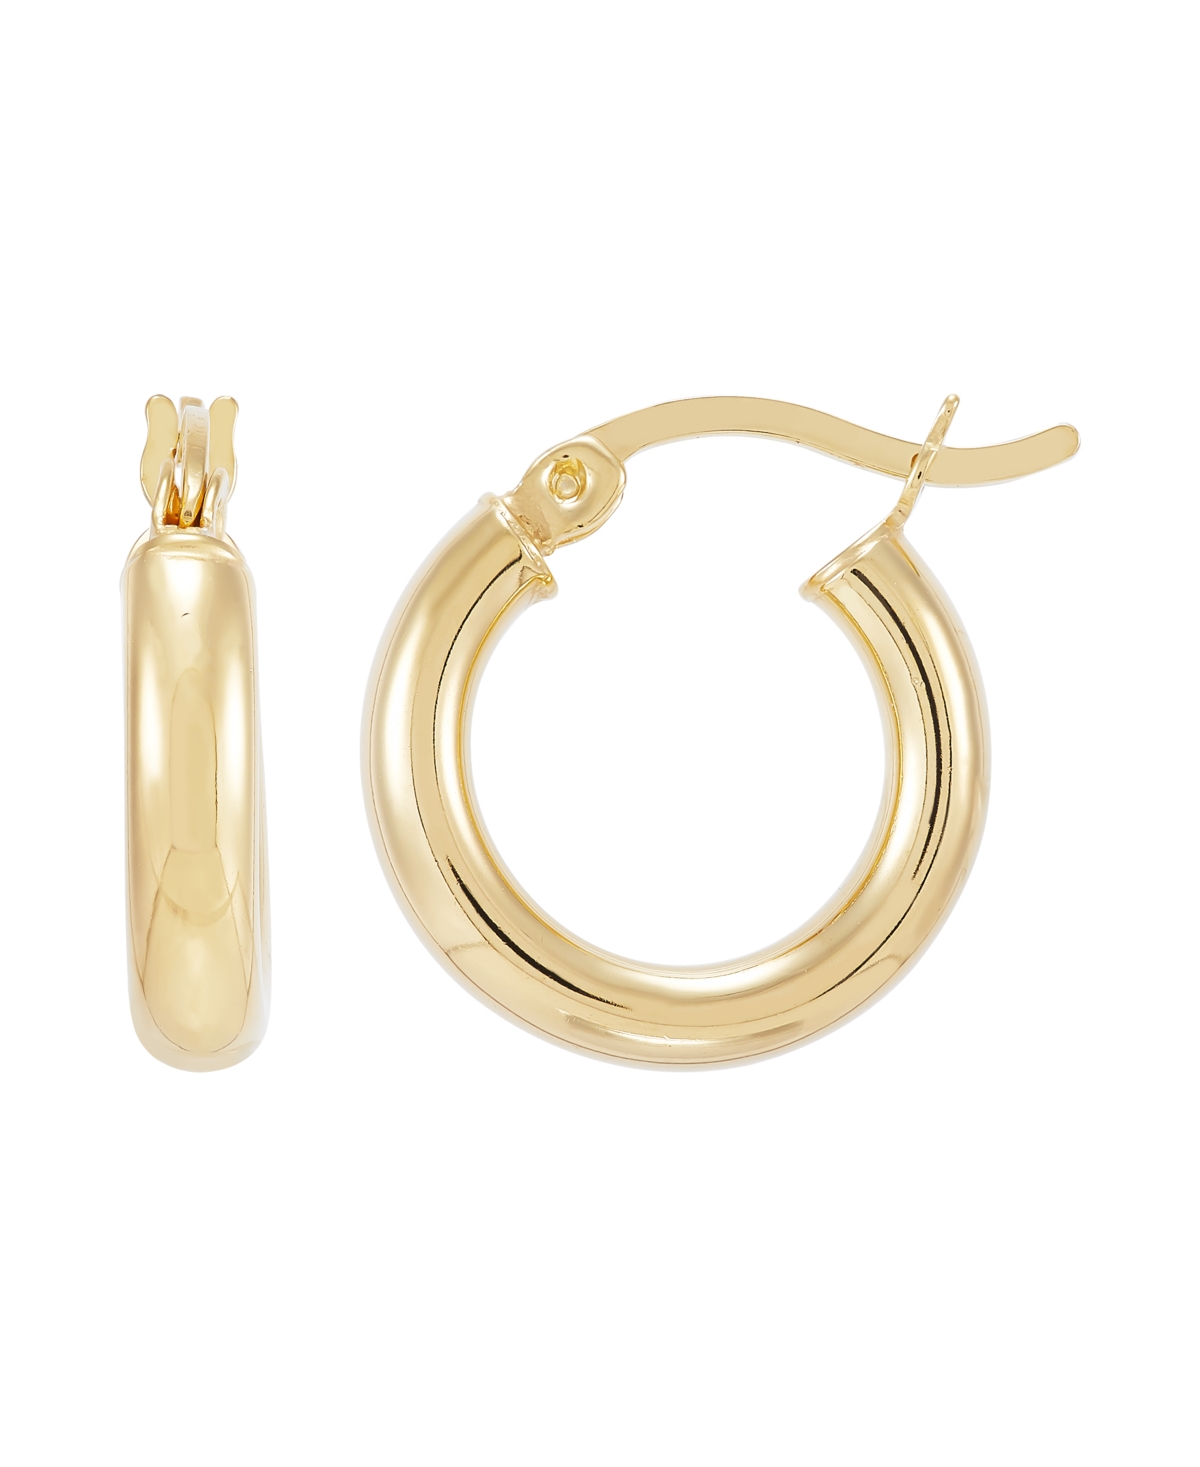 Polished Tube Hoop Earrings, 15mm, Created for Macy's - Gold Over Silver